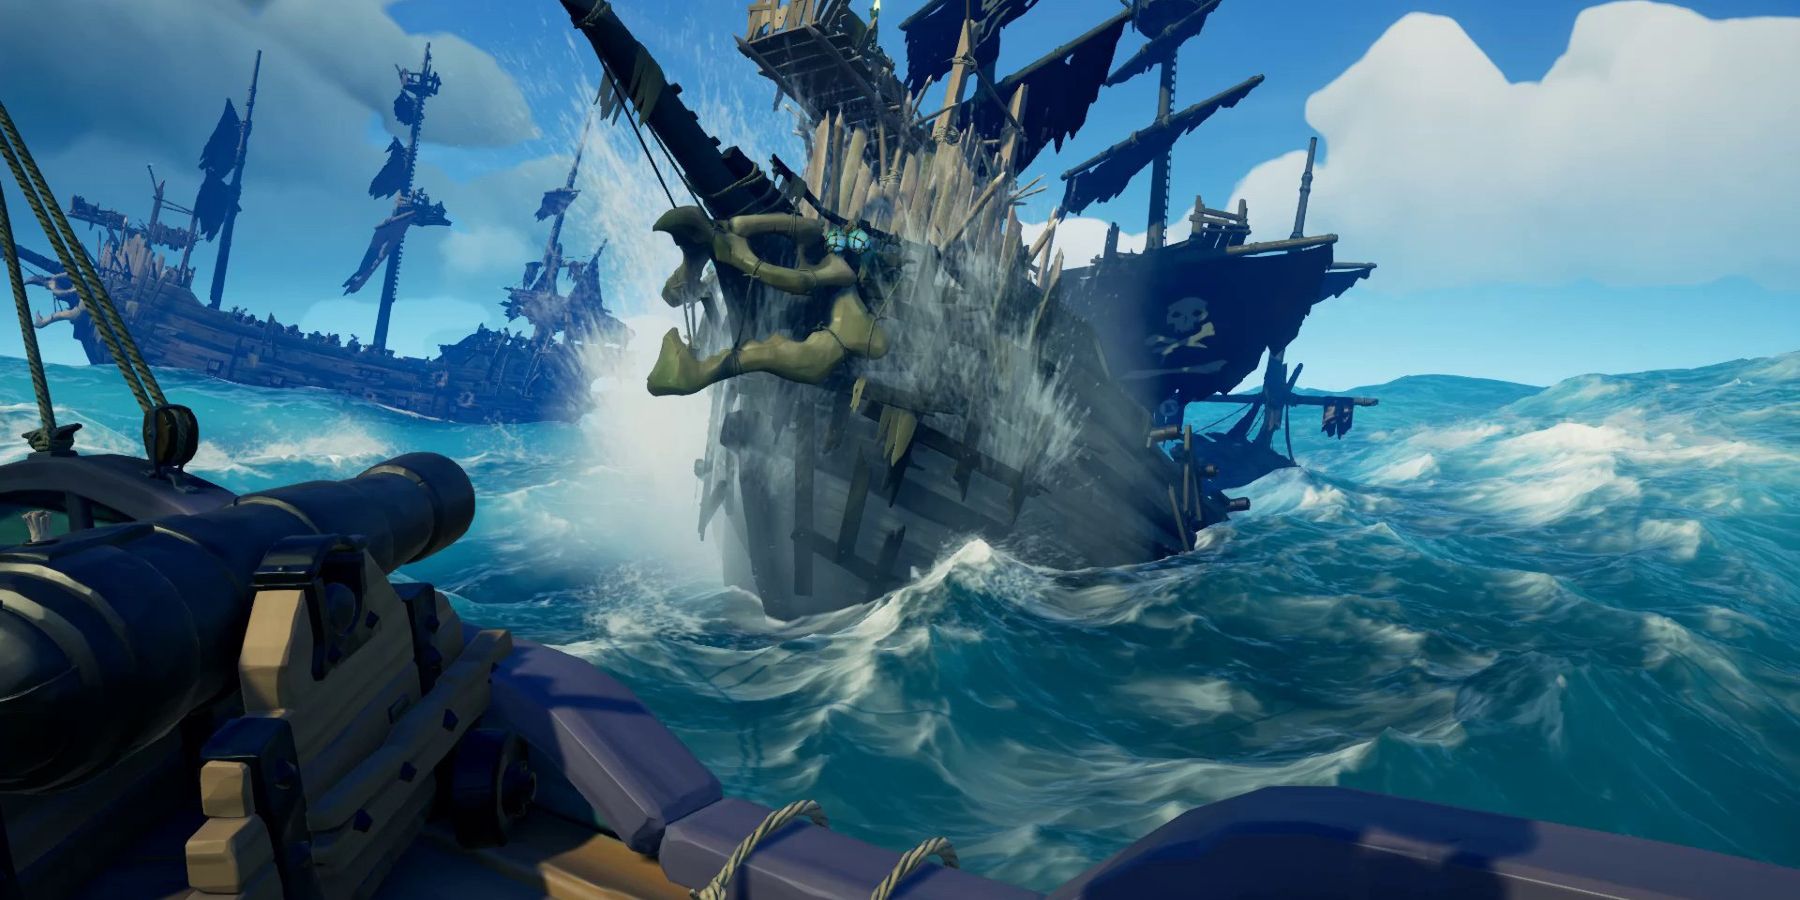 Sea of Thieves Update Changes Makes Ship Sinking More
Worthwhile